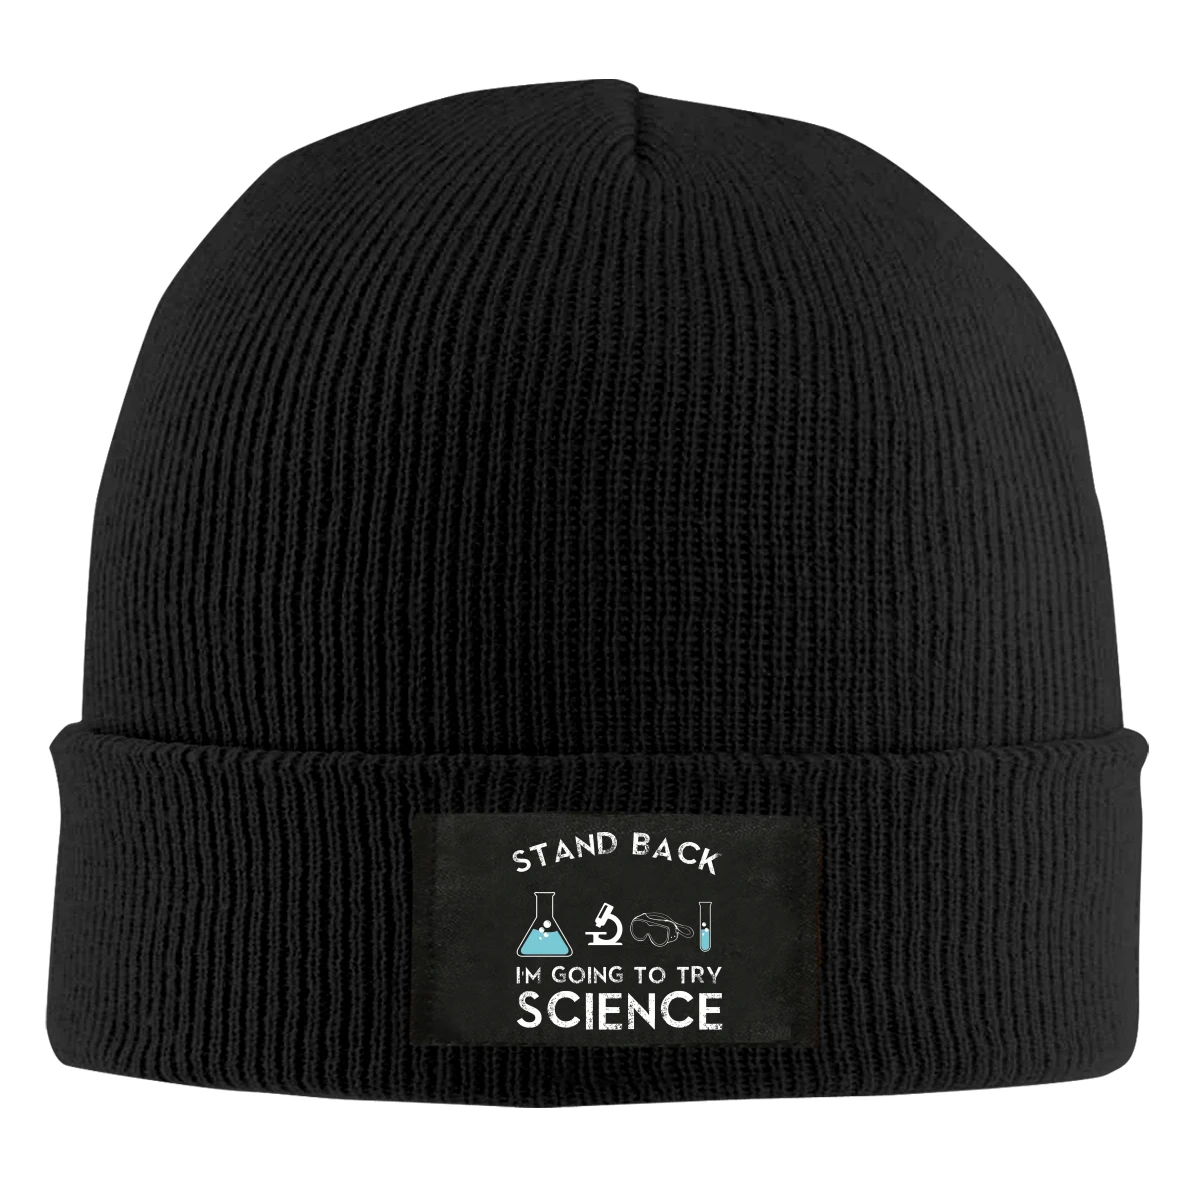 

Stand Back I'm Going To Try Science Beanie Hats For Men Women With Designs Winter Slouchy Knit Skull Cap